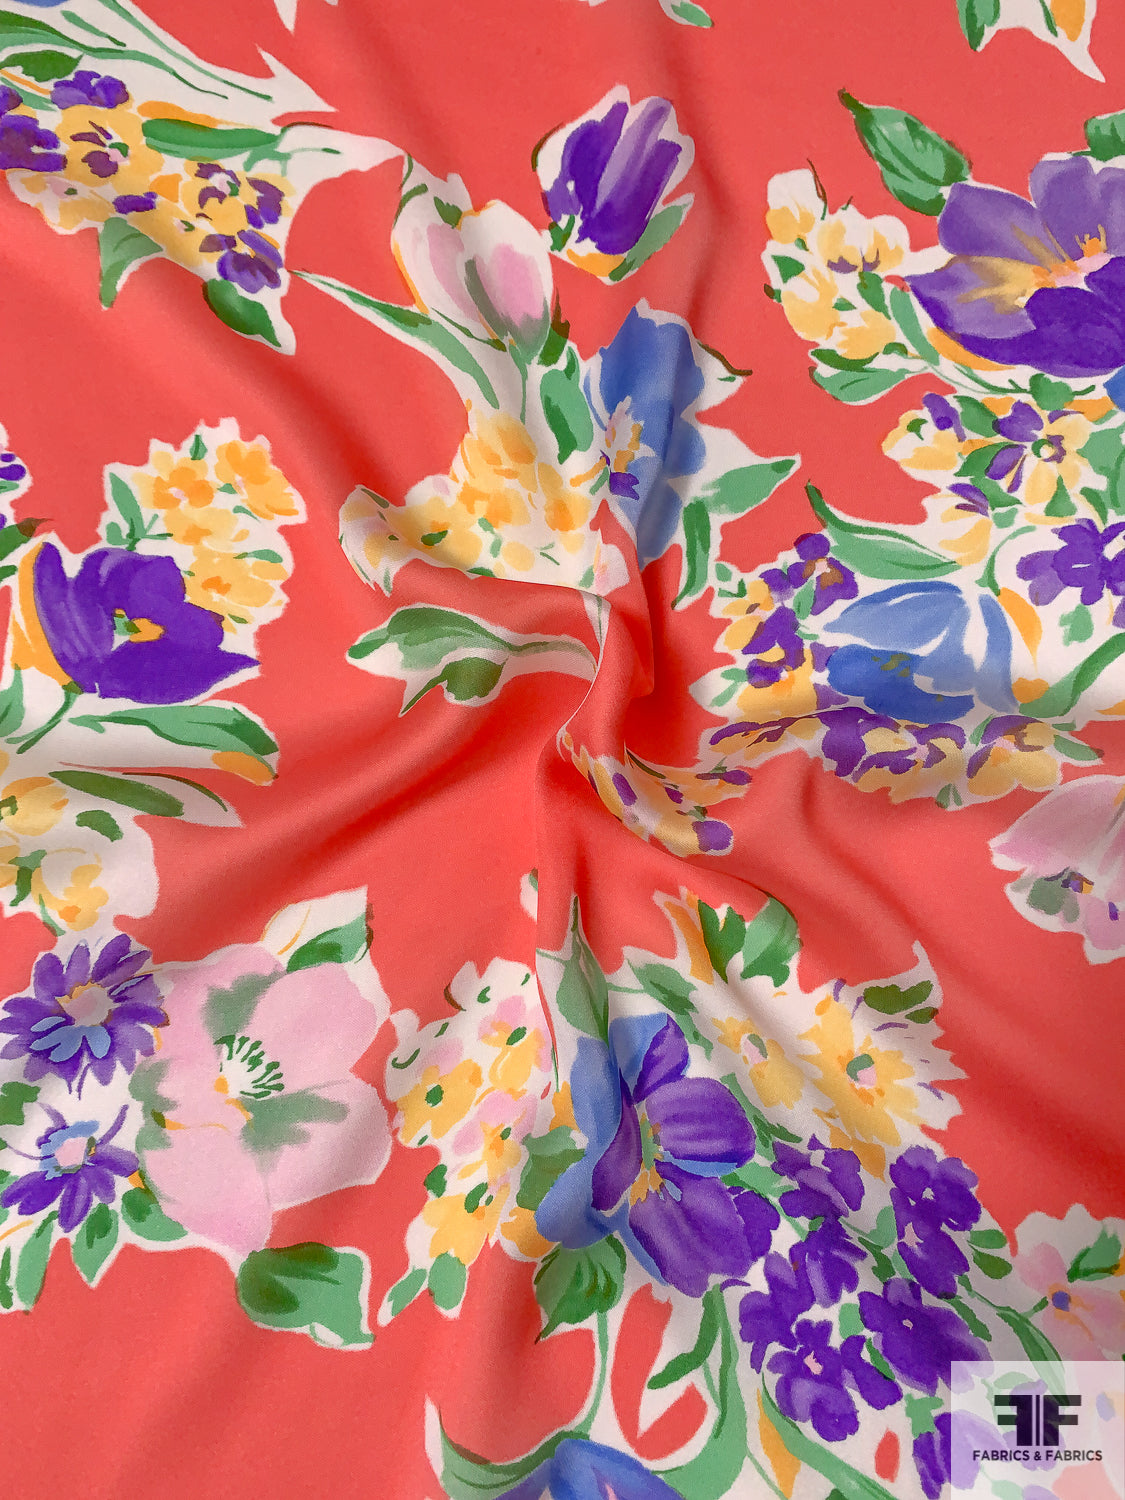 Italian Floral Bouquets Printed Silk Satin Georgette - Coral / Purple / Green / Pink